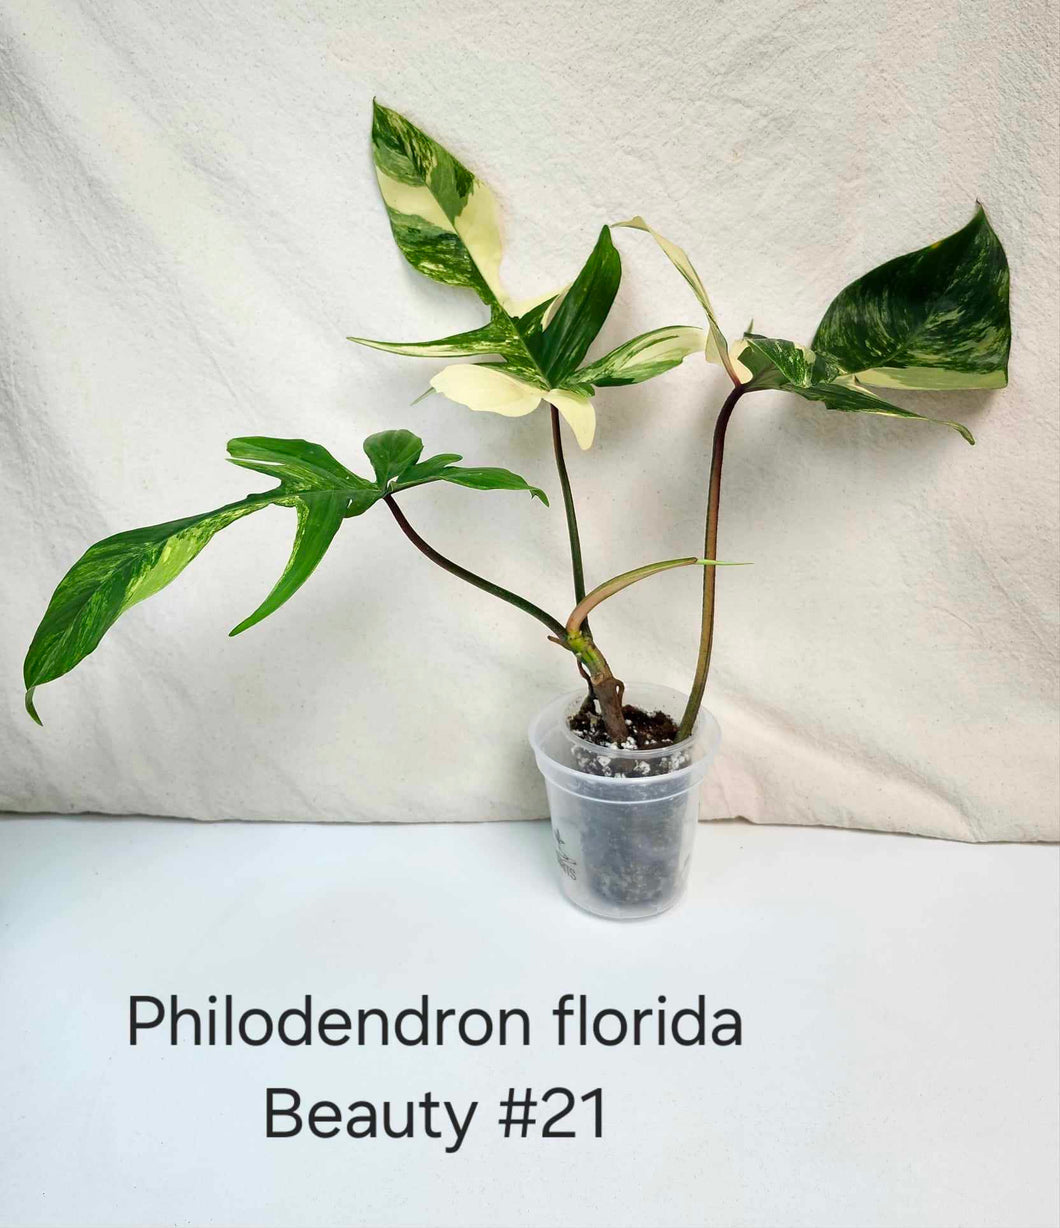 Philodendron florida beauty #21